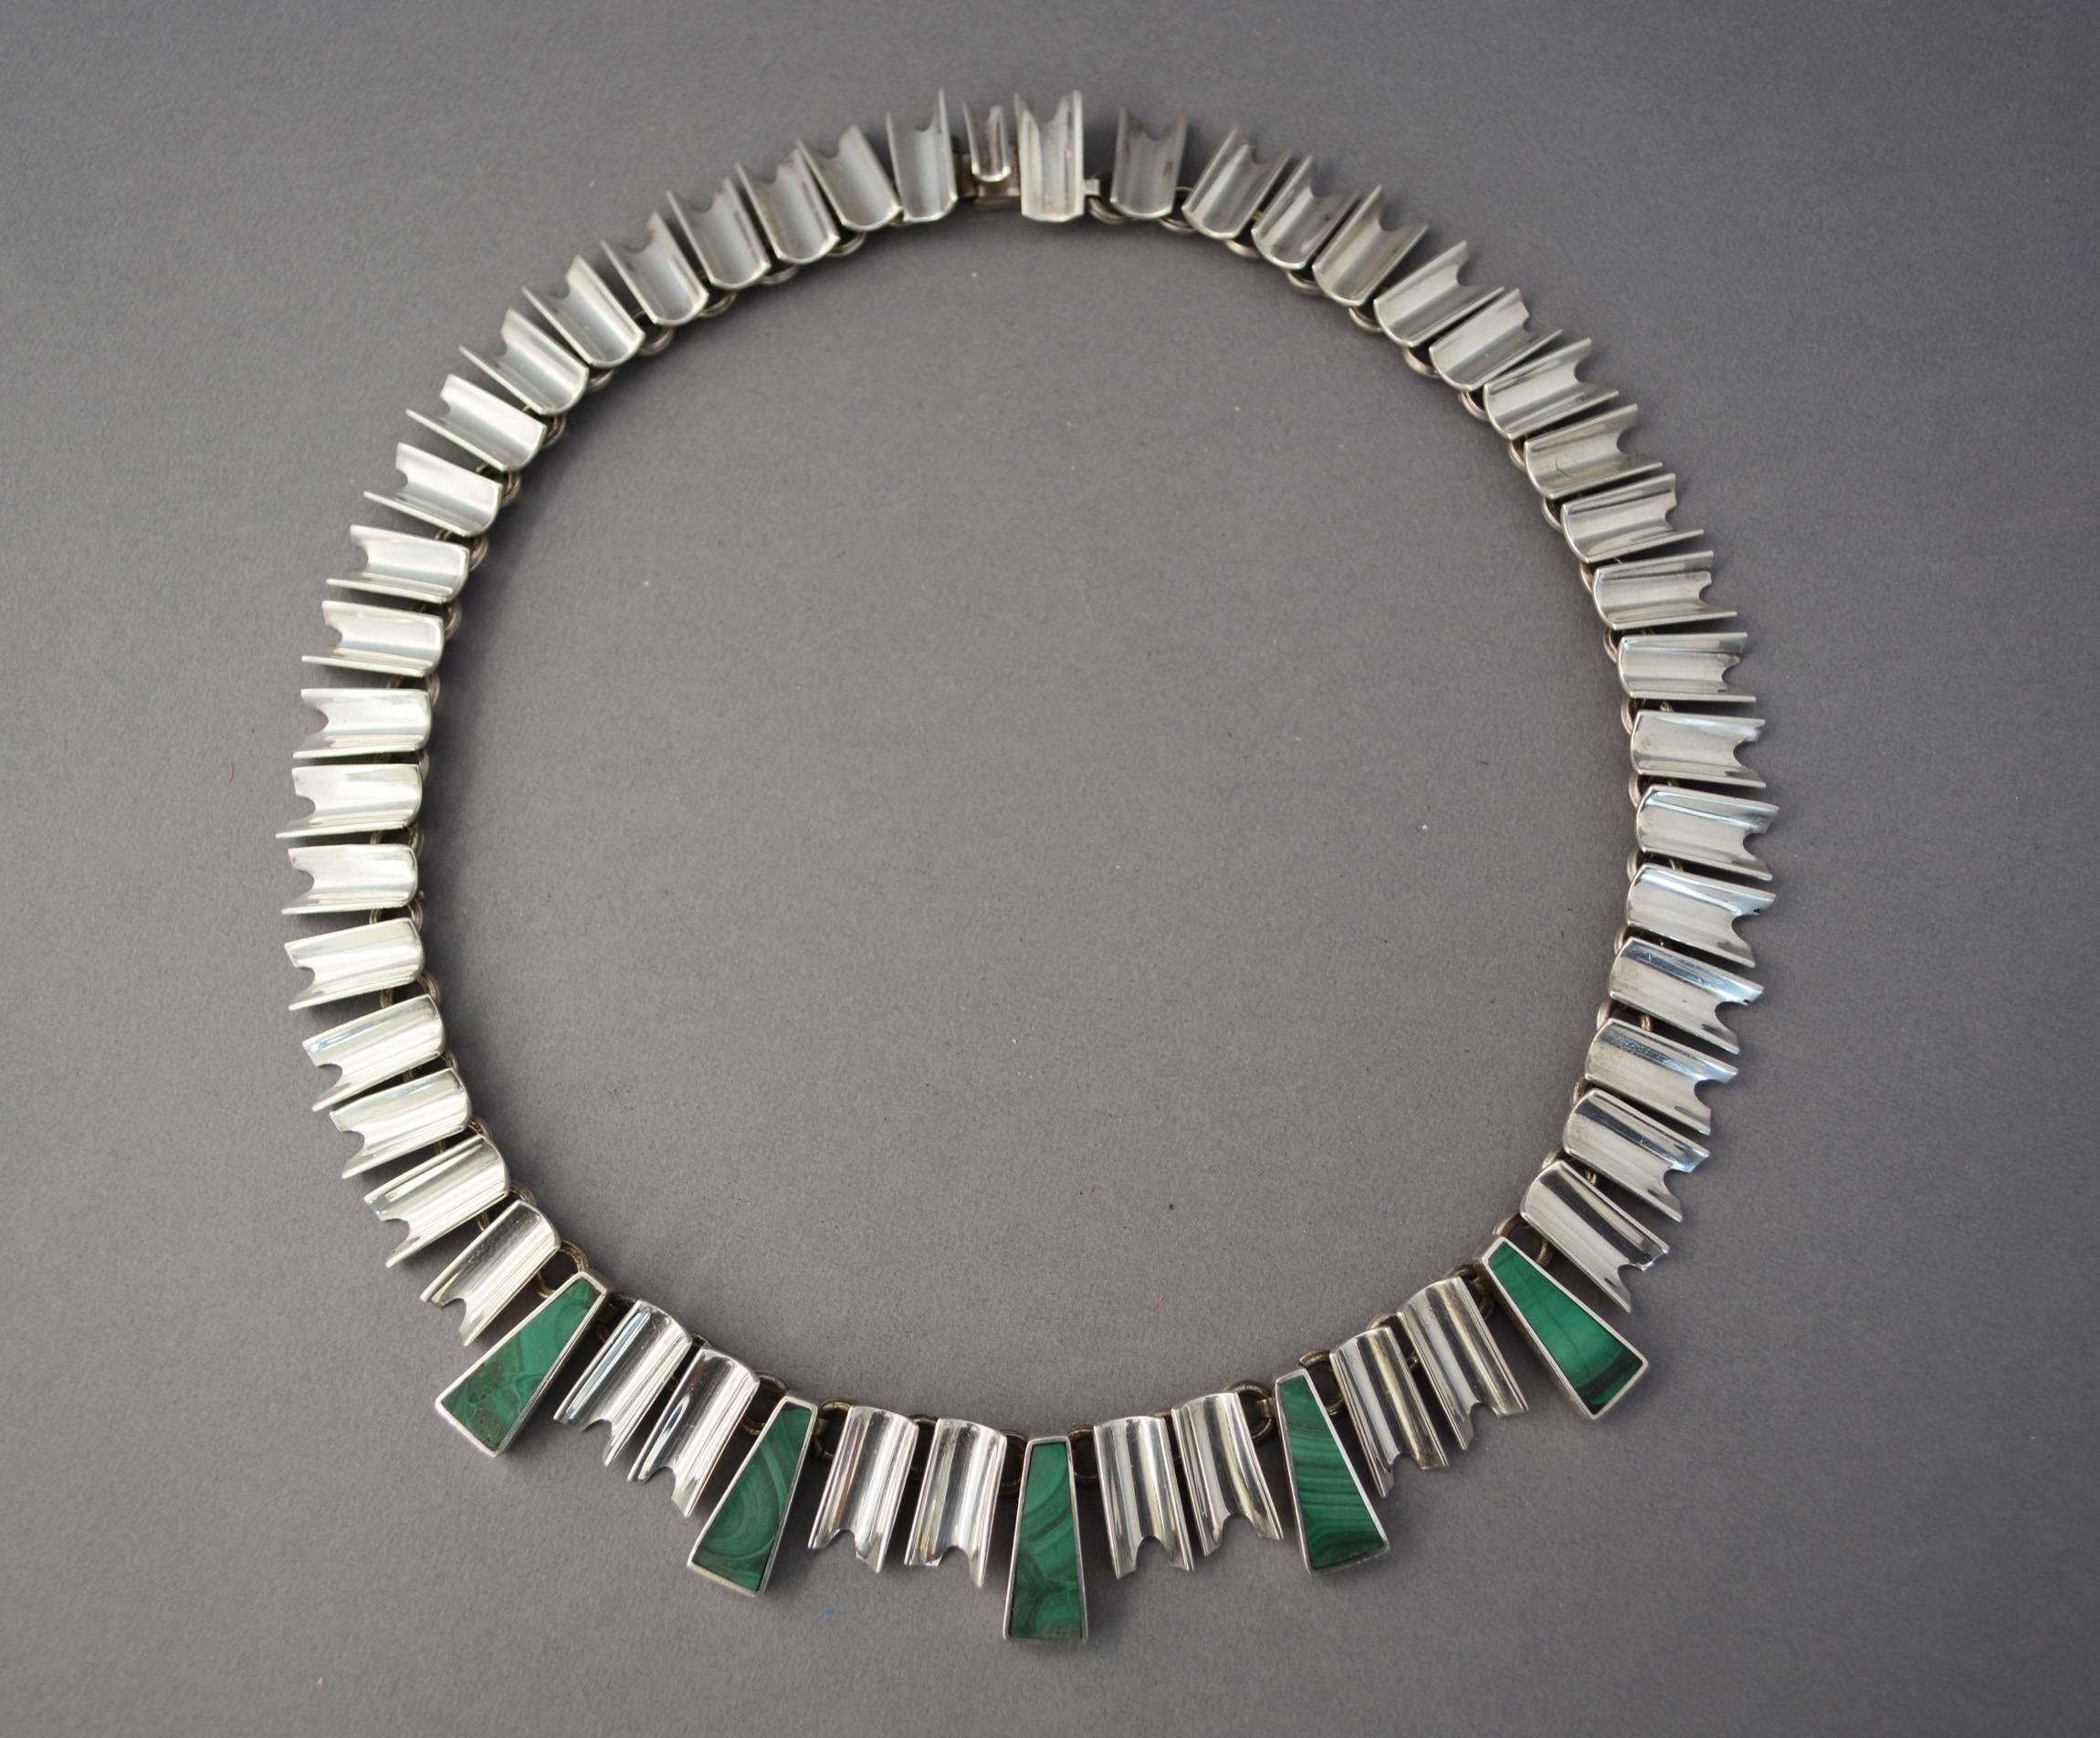 Taxco sterling necklace with a strong Art Deco influence. This has five elongated trapezoids inset with malachite. The necklace is 18.5